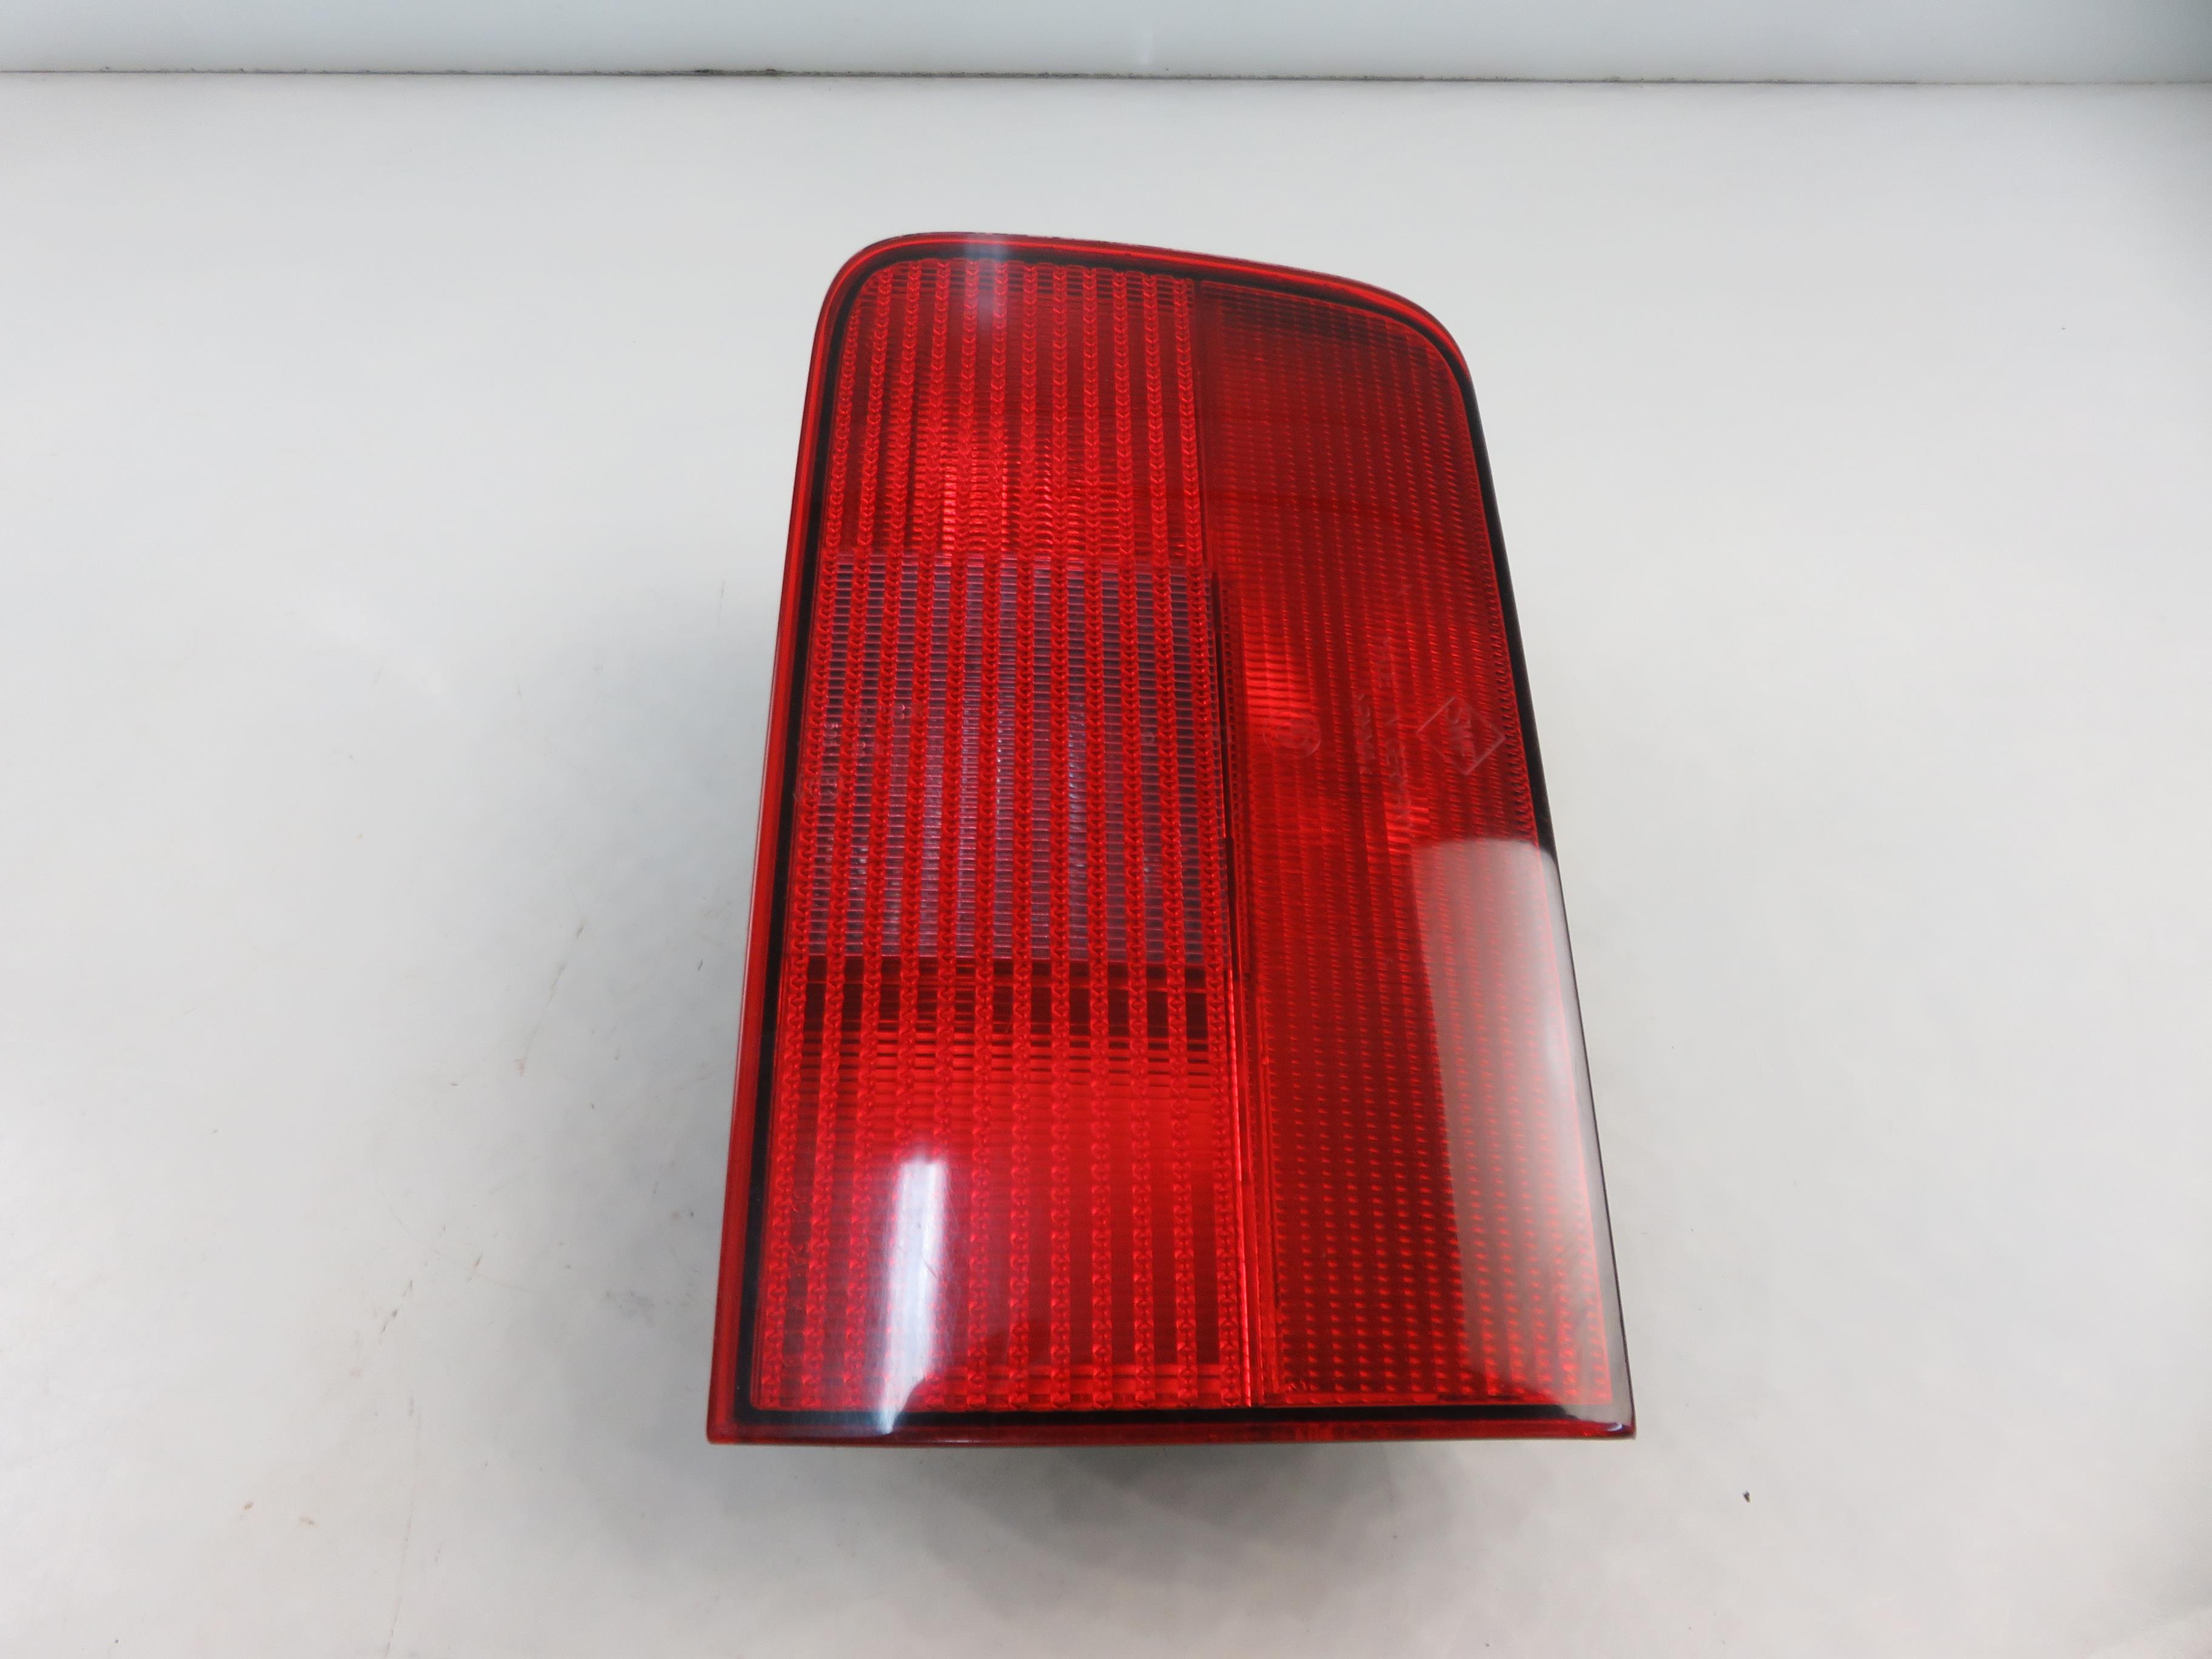 BMW 5 Series E39 (1995-2004) Rear Right Taillight Lamp 8361674 23715612